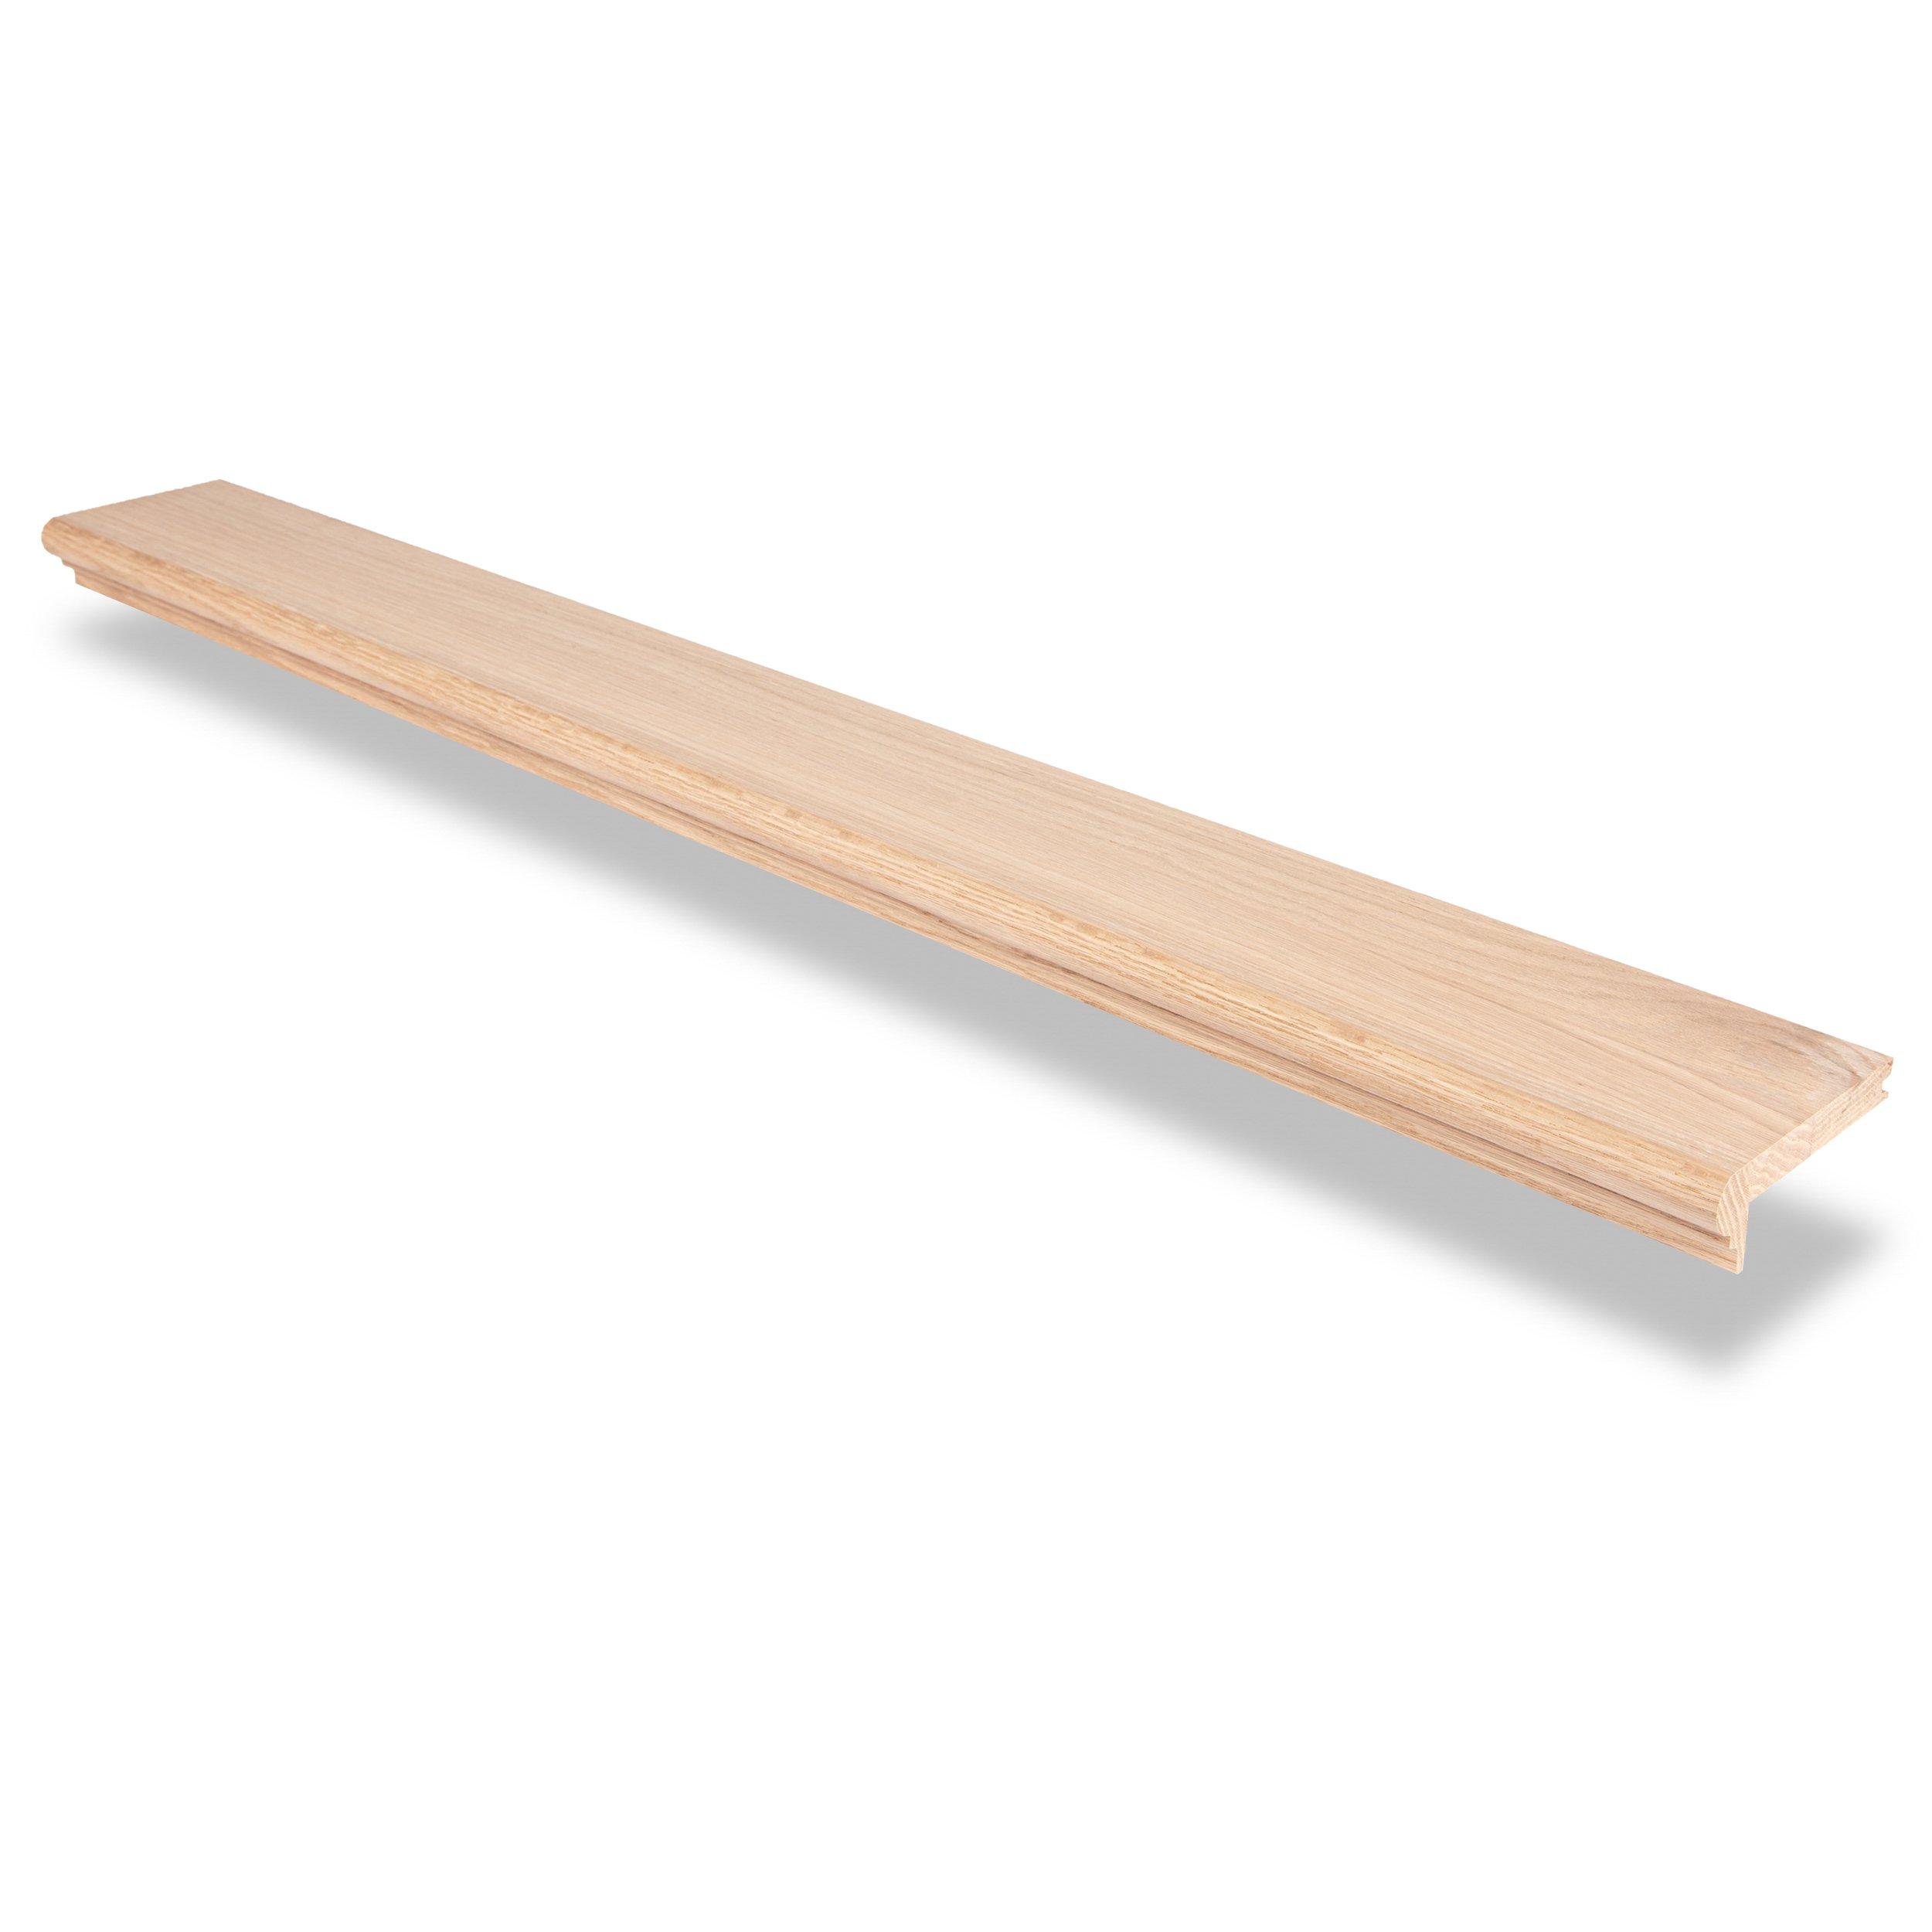 Red Oak Retro Stair Nose - 96in.